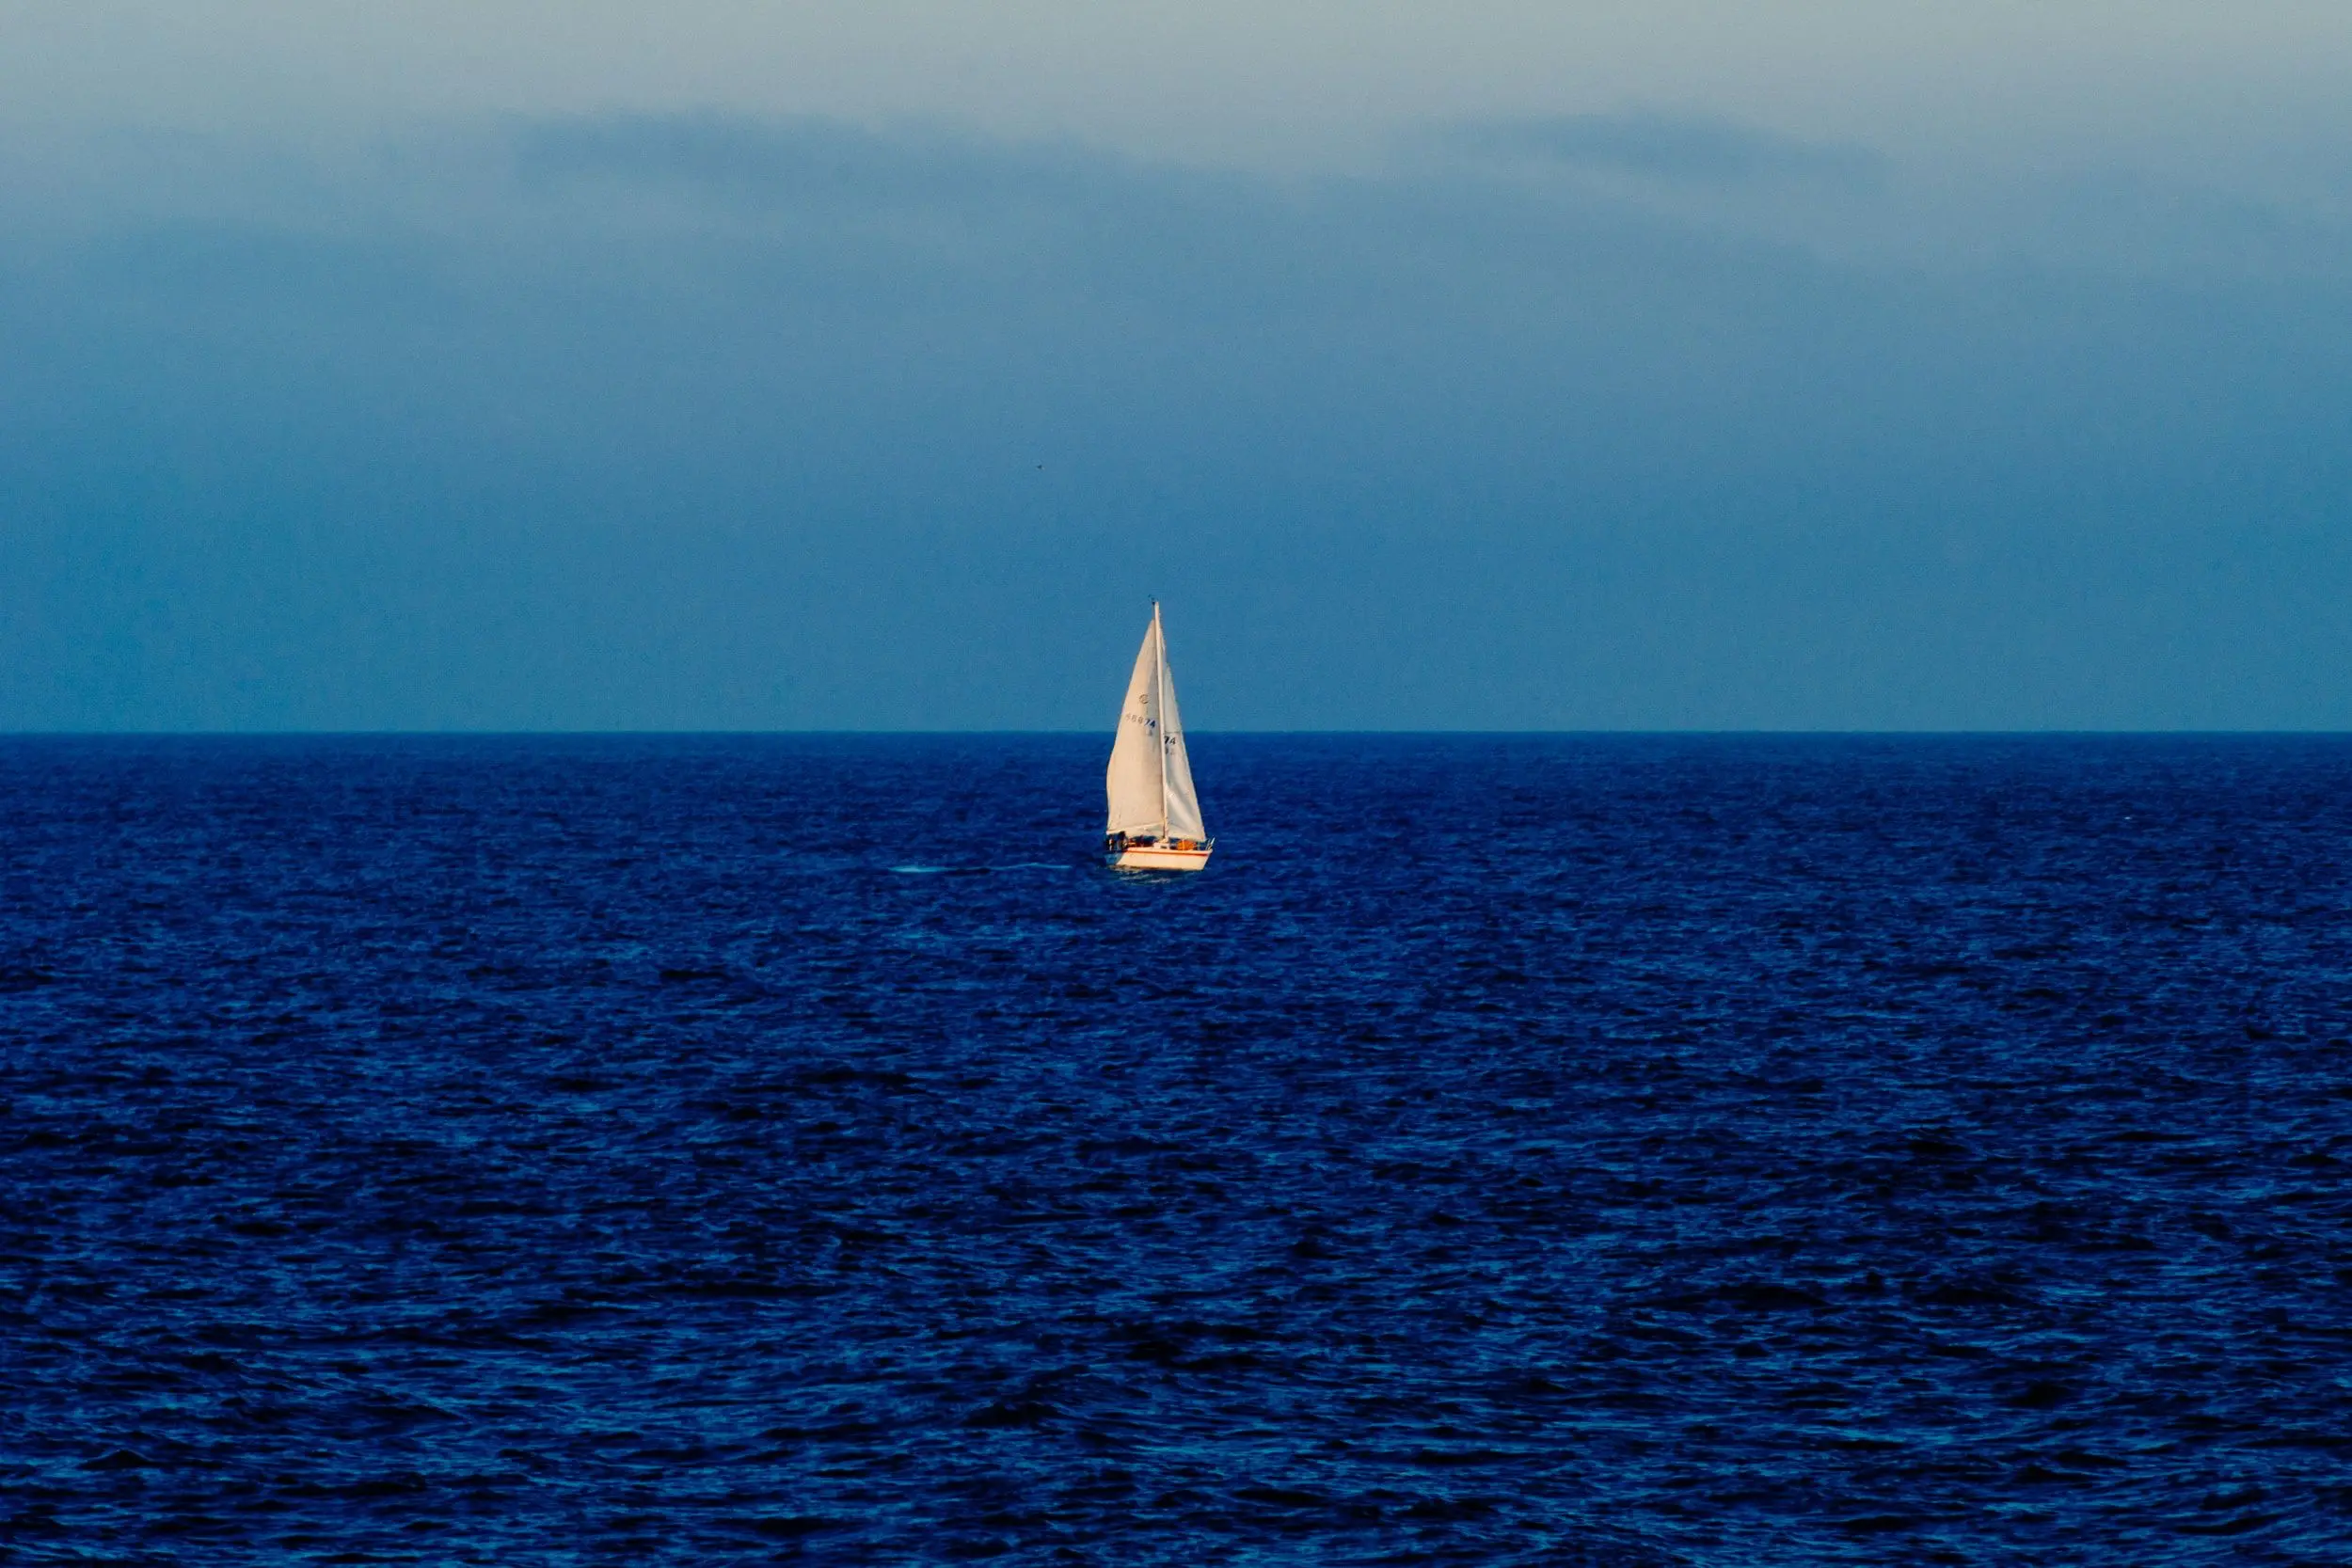 A white sailboat surrounded by the intense blues of the sky and ocean.